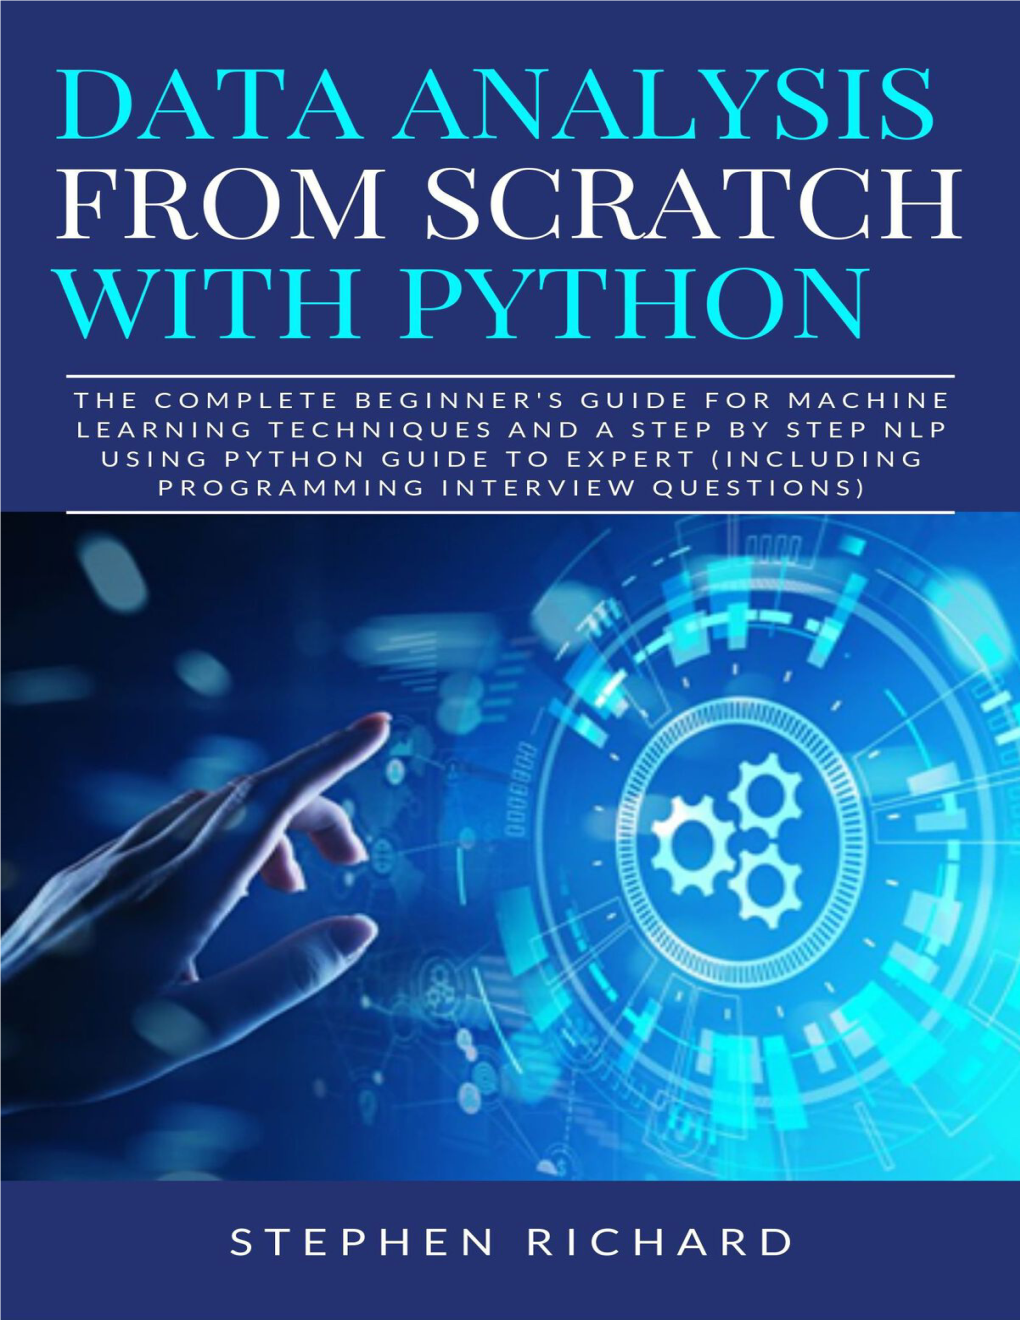 Data Analysis from Scratch with Python: the Complete Beginner's